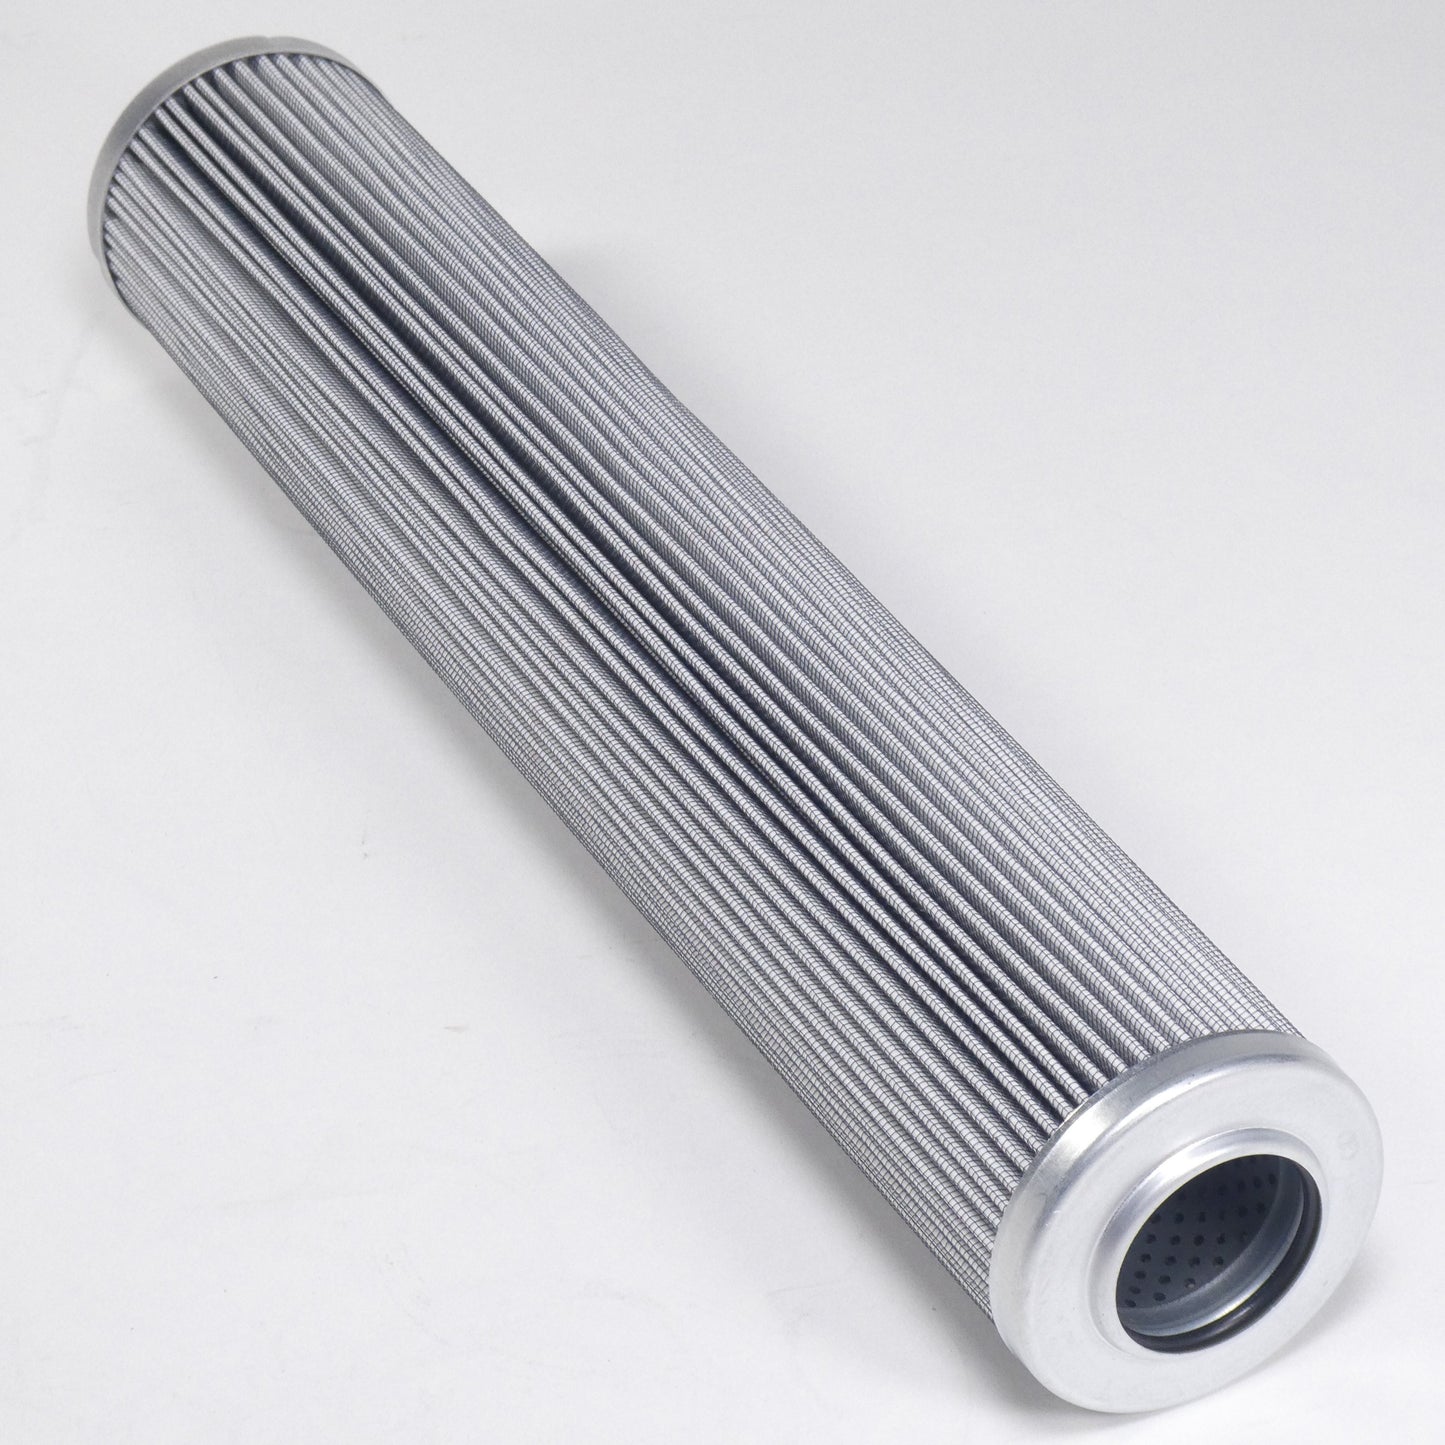 Hydrafil Replacement Filter Element for National Filter 9616 3